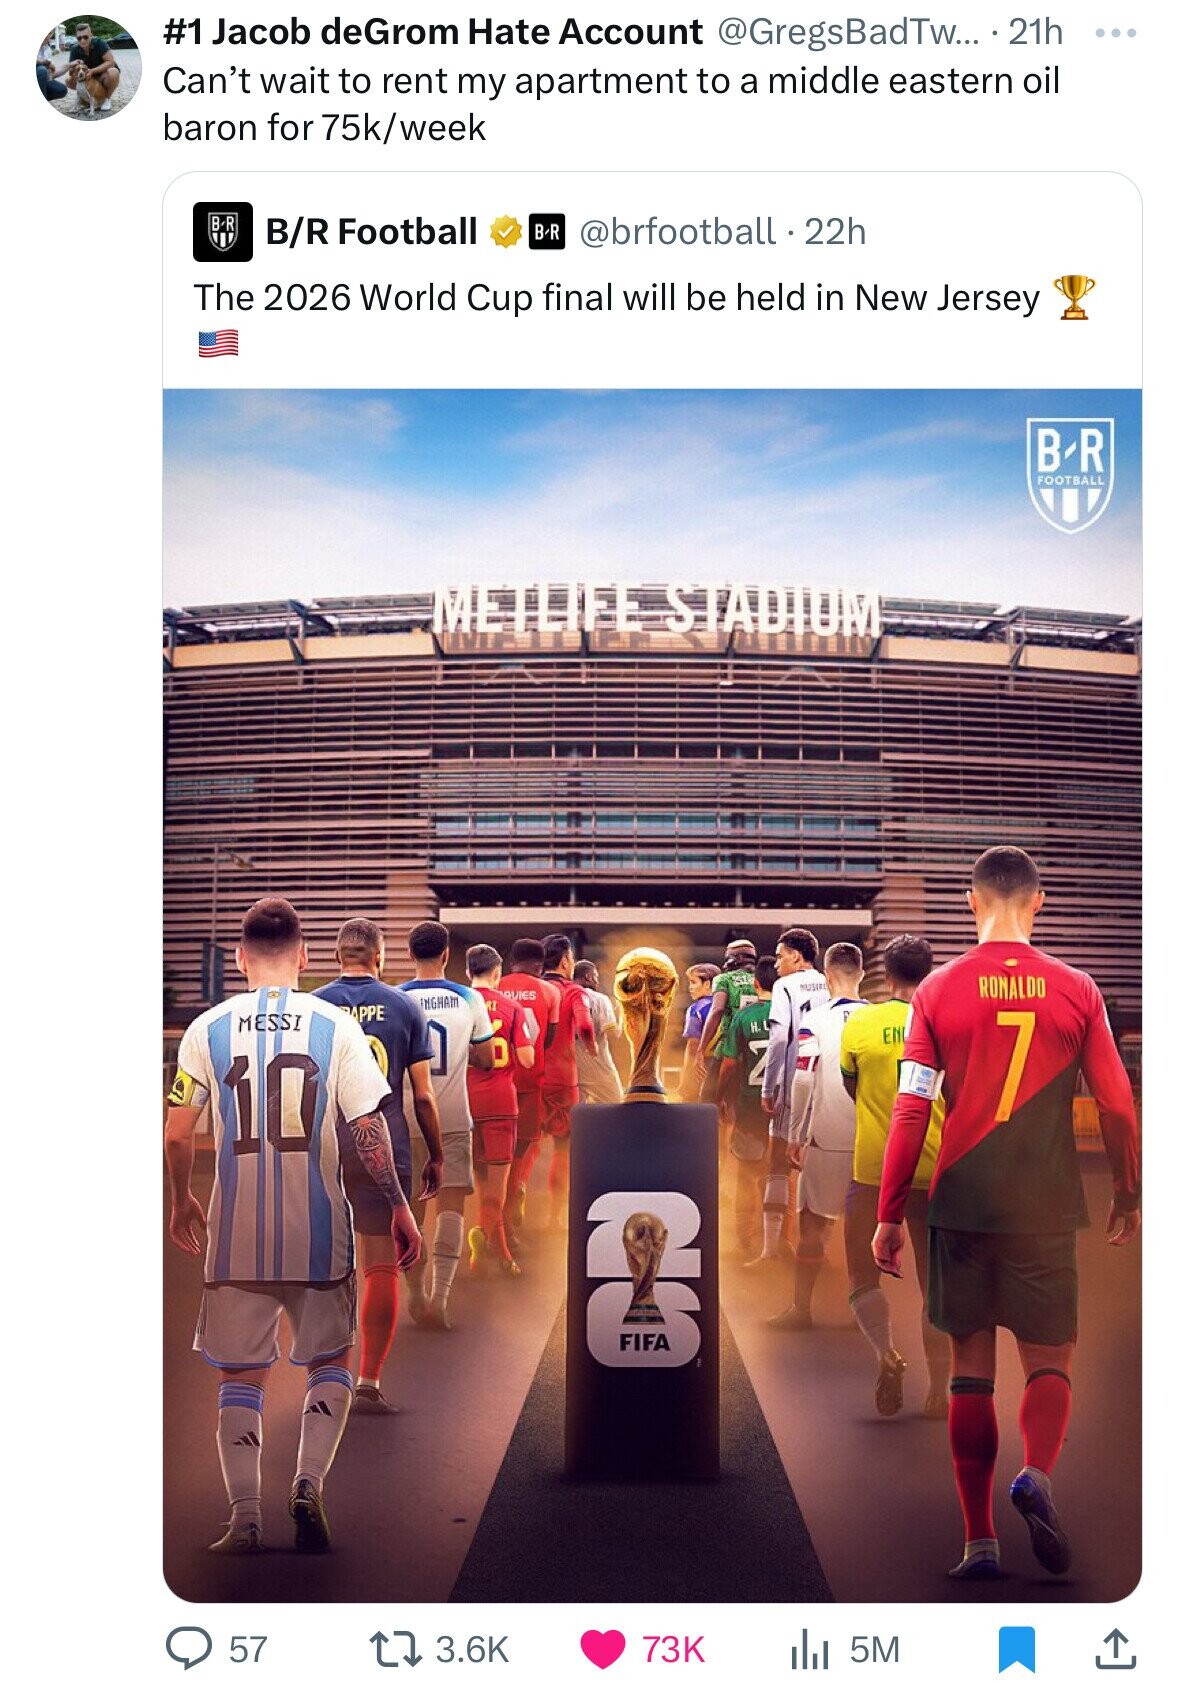 metlife stadium - Jacob deGrom Hate Account Tw.... 21h Can't wait to rent my apartment to a middle eastern oil baron for 75kweek BR Football Br . 22h The 2026 World Cup final will be held in New Jersey BR Messi 10 57 Appe Metlife Stadio Ingham Quies Fifa 